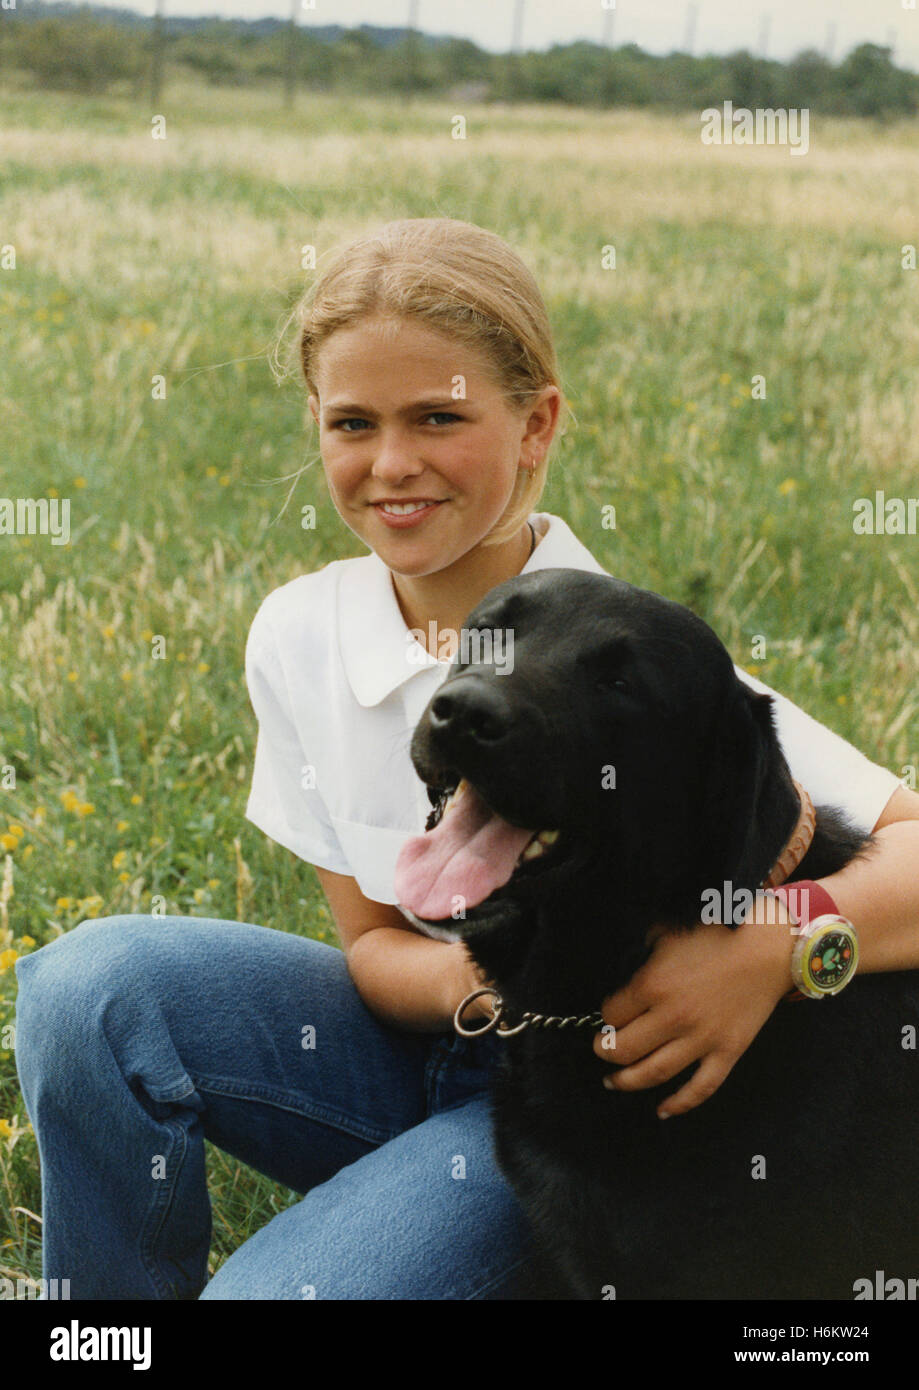 princess-madeleine-with-the-family-dog-at-vacation-at-land-1993-H6KW24.jpg